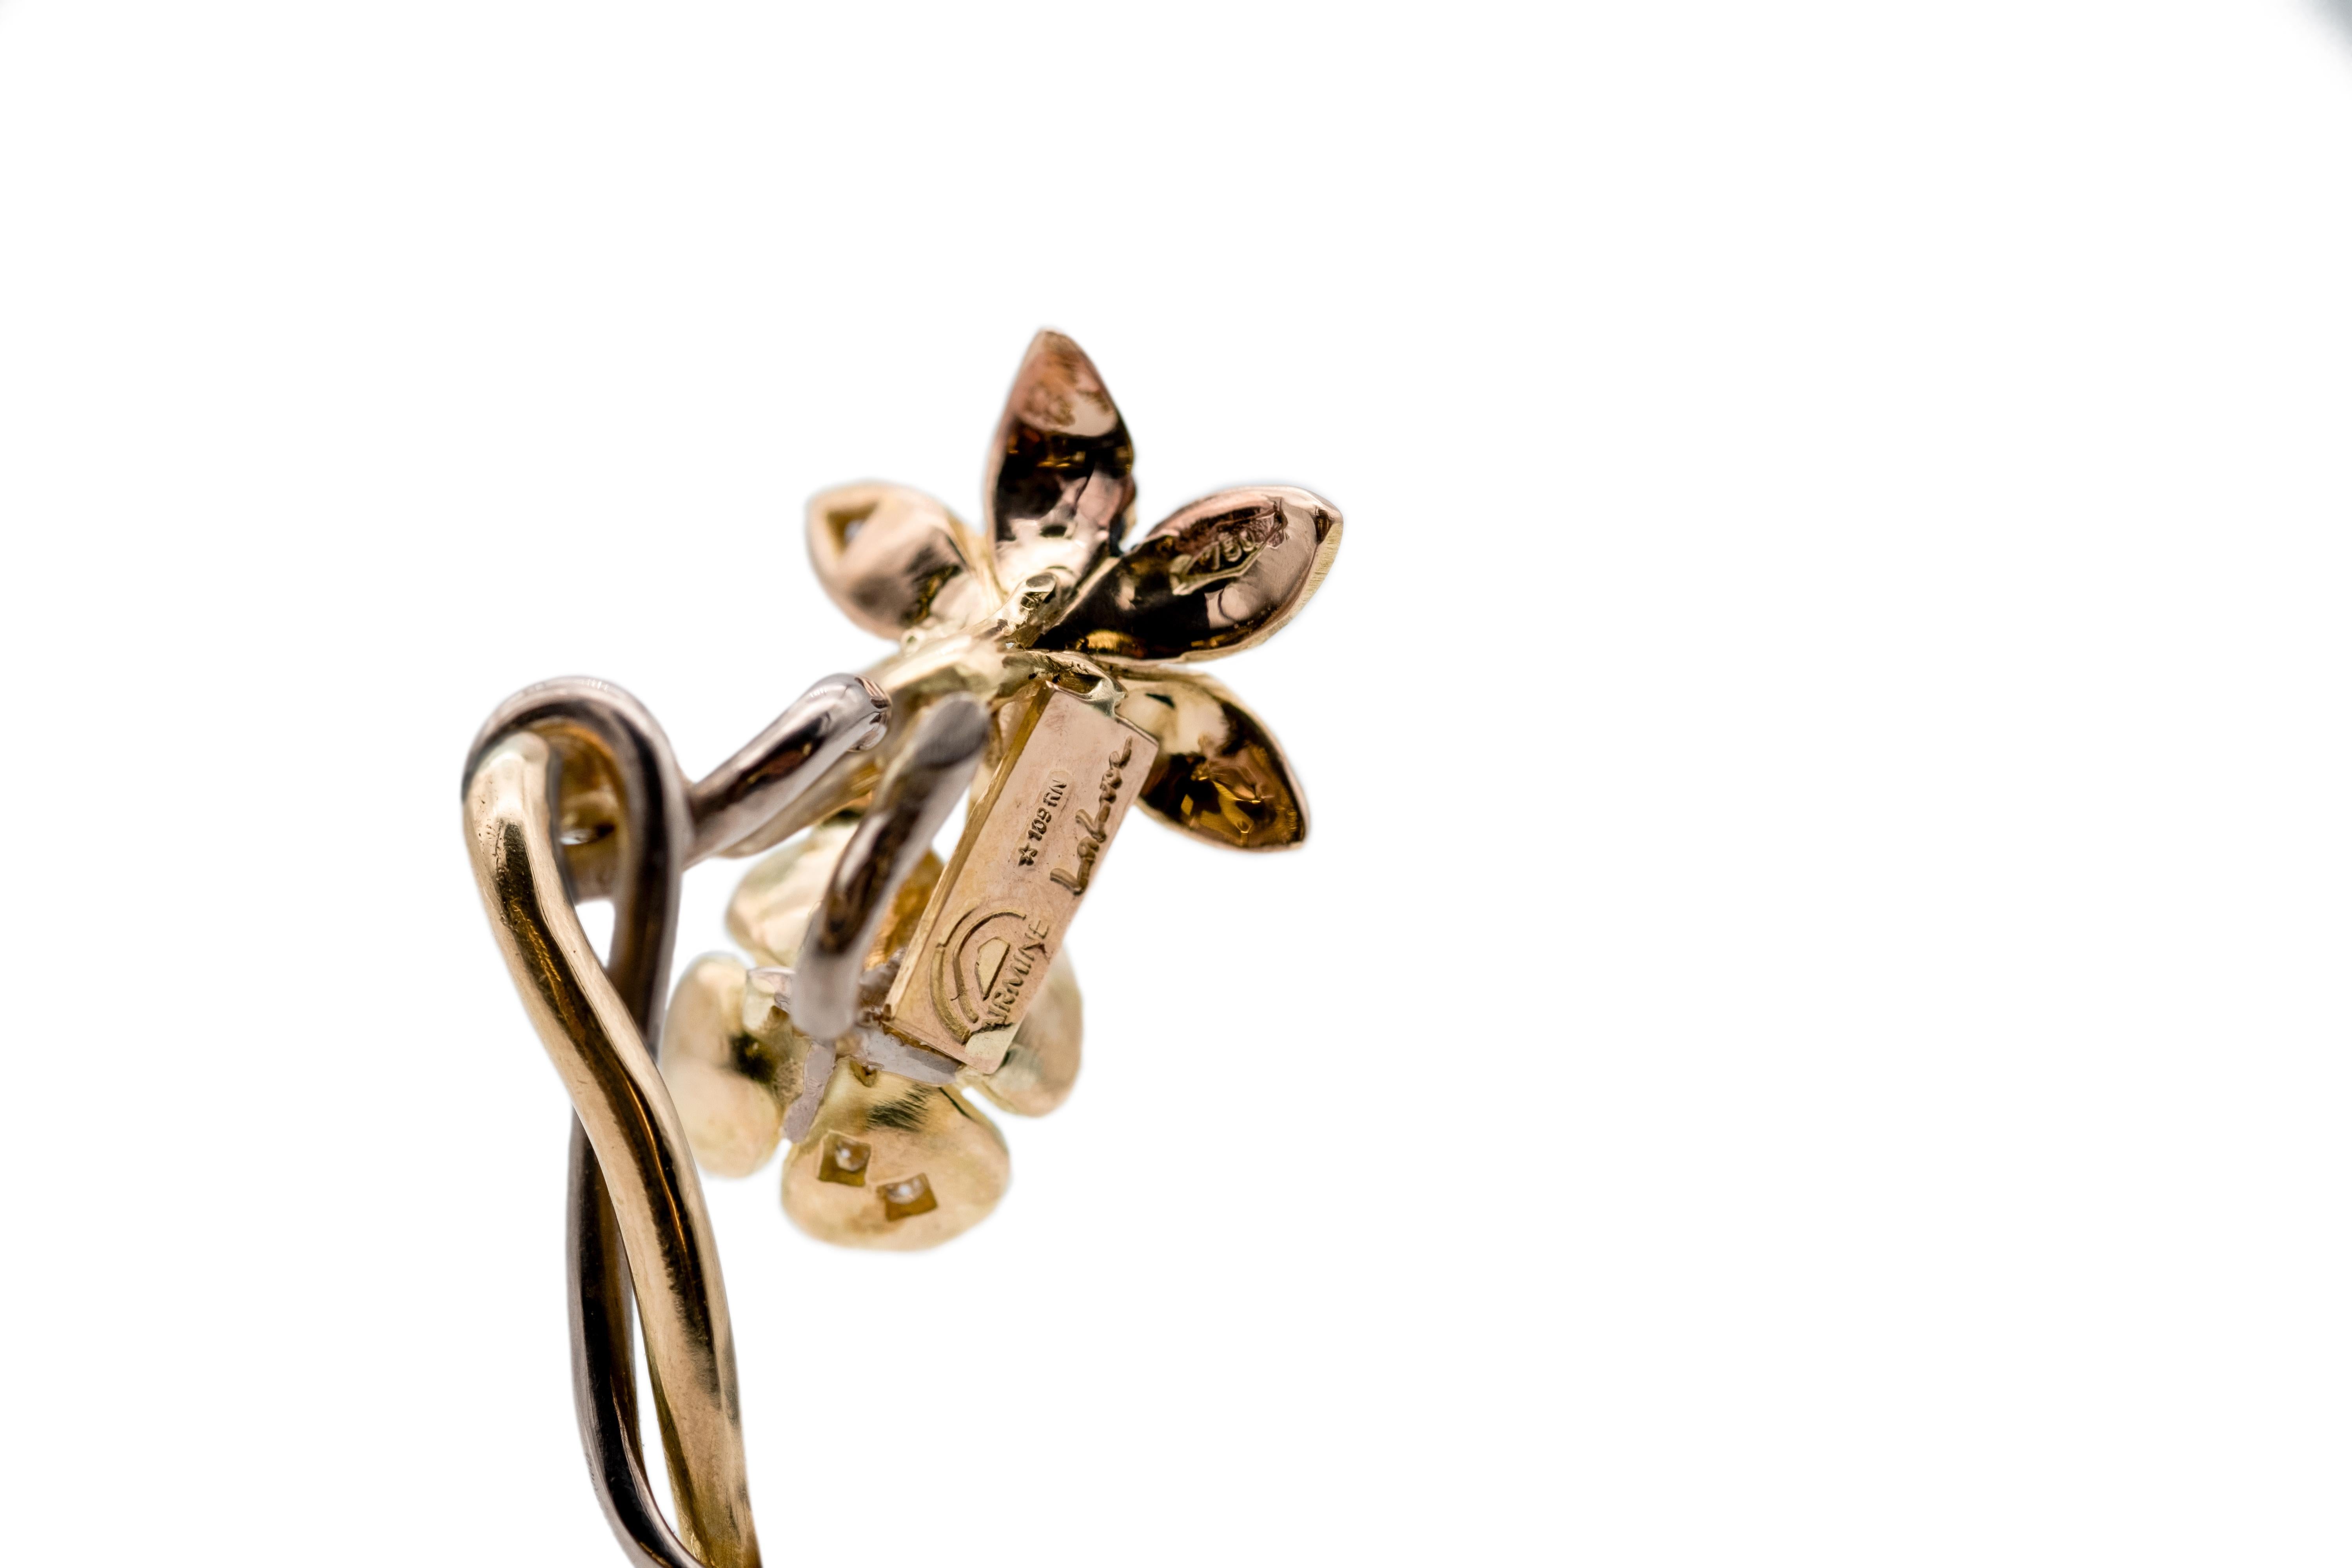 Completely handmade in Italy, 18K yellow, rose and palladium white Fairmined Gold earring with Canadamark diamonds.

The flowers screw into the stem. The screw is handmade, we suggest closing it gently and being careful not to force it. 

This item